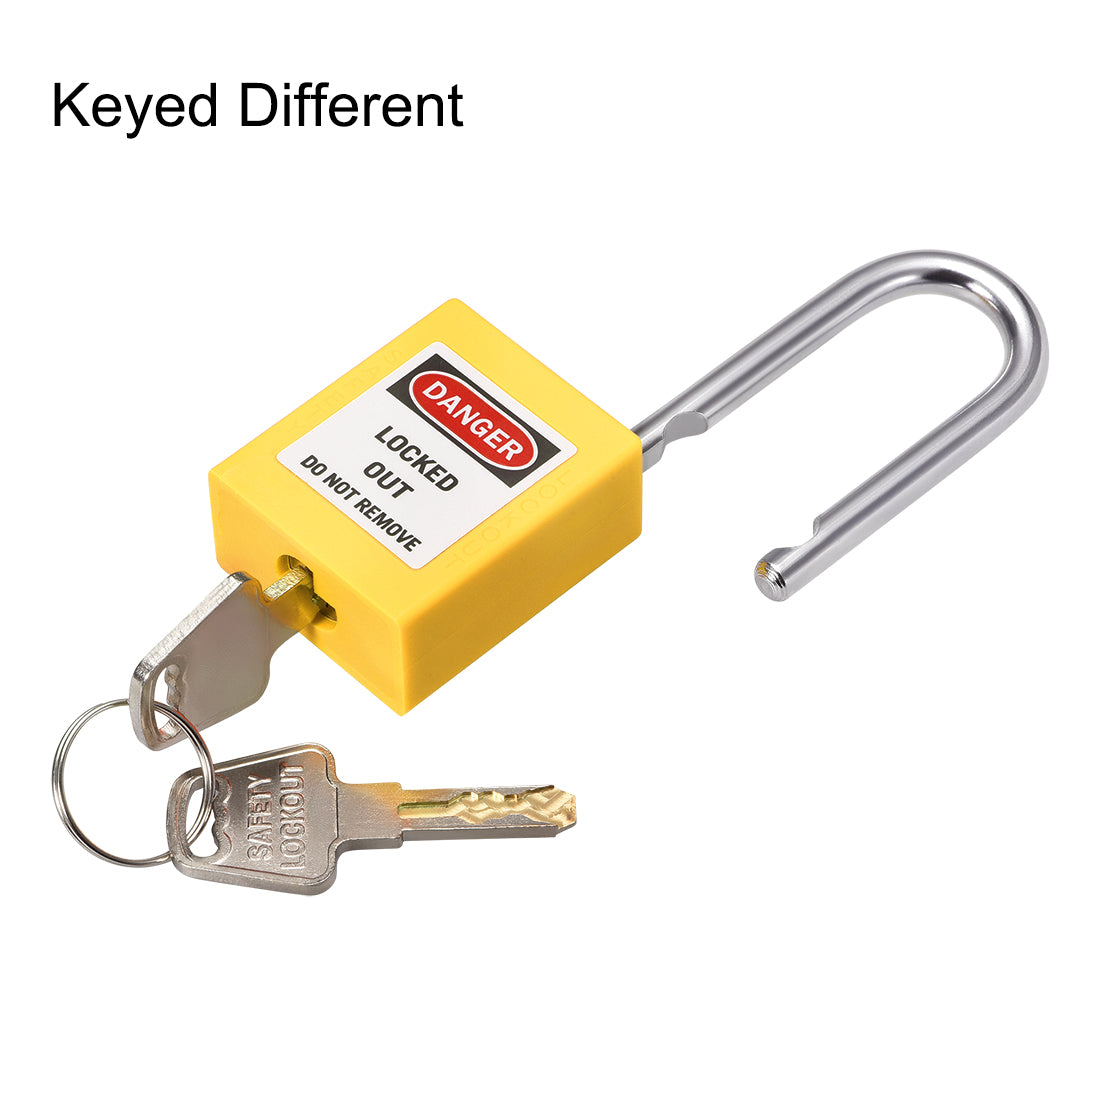 uxcell Uxcell Lockout Tagout Safety Padlock 38mm Steel Shackle Keyed Different Yellow